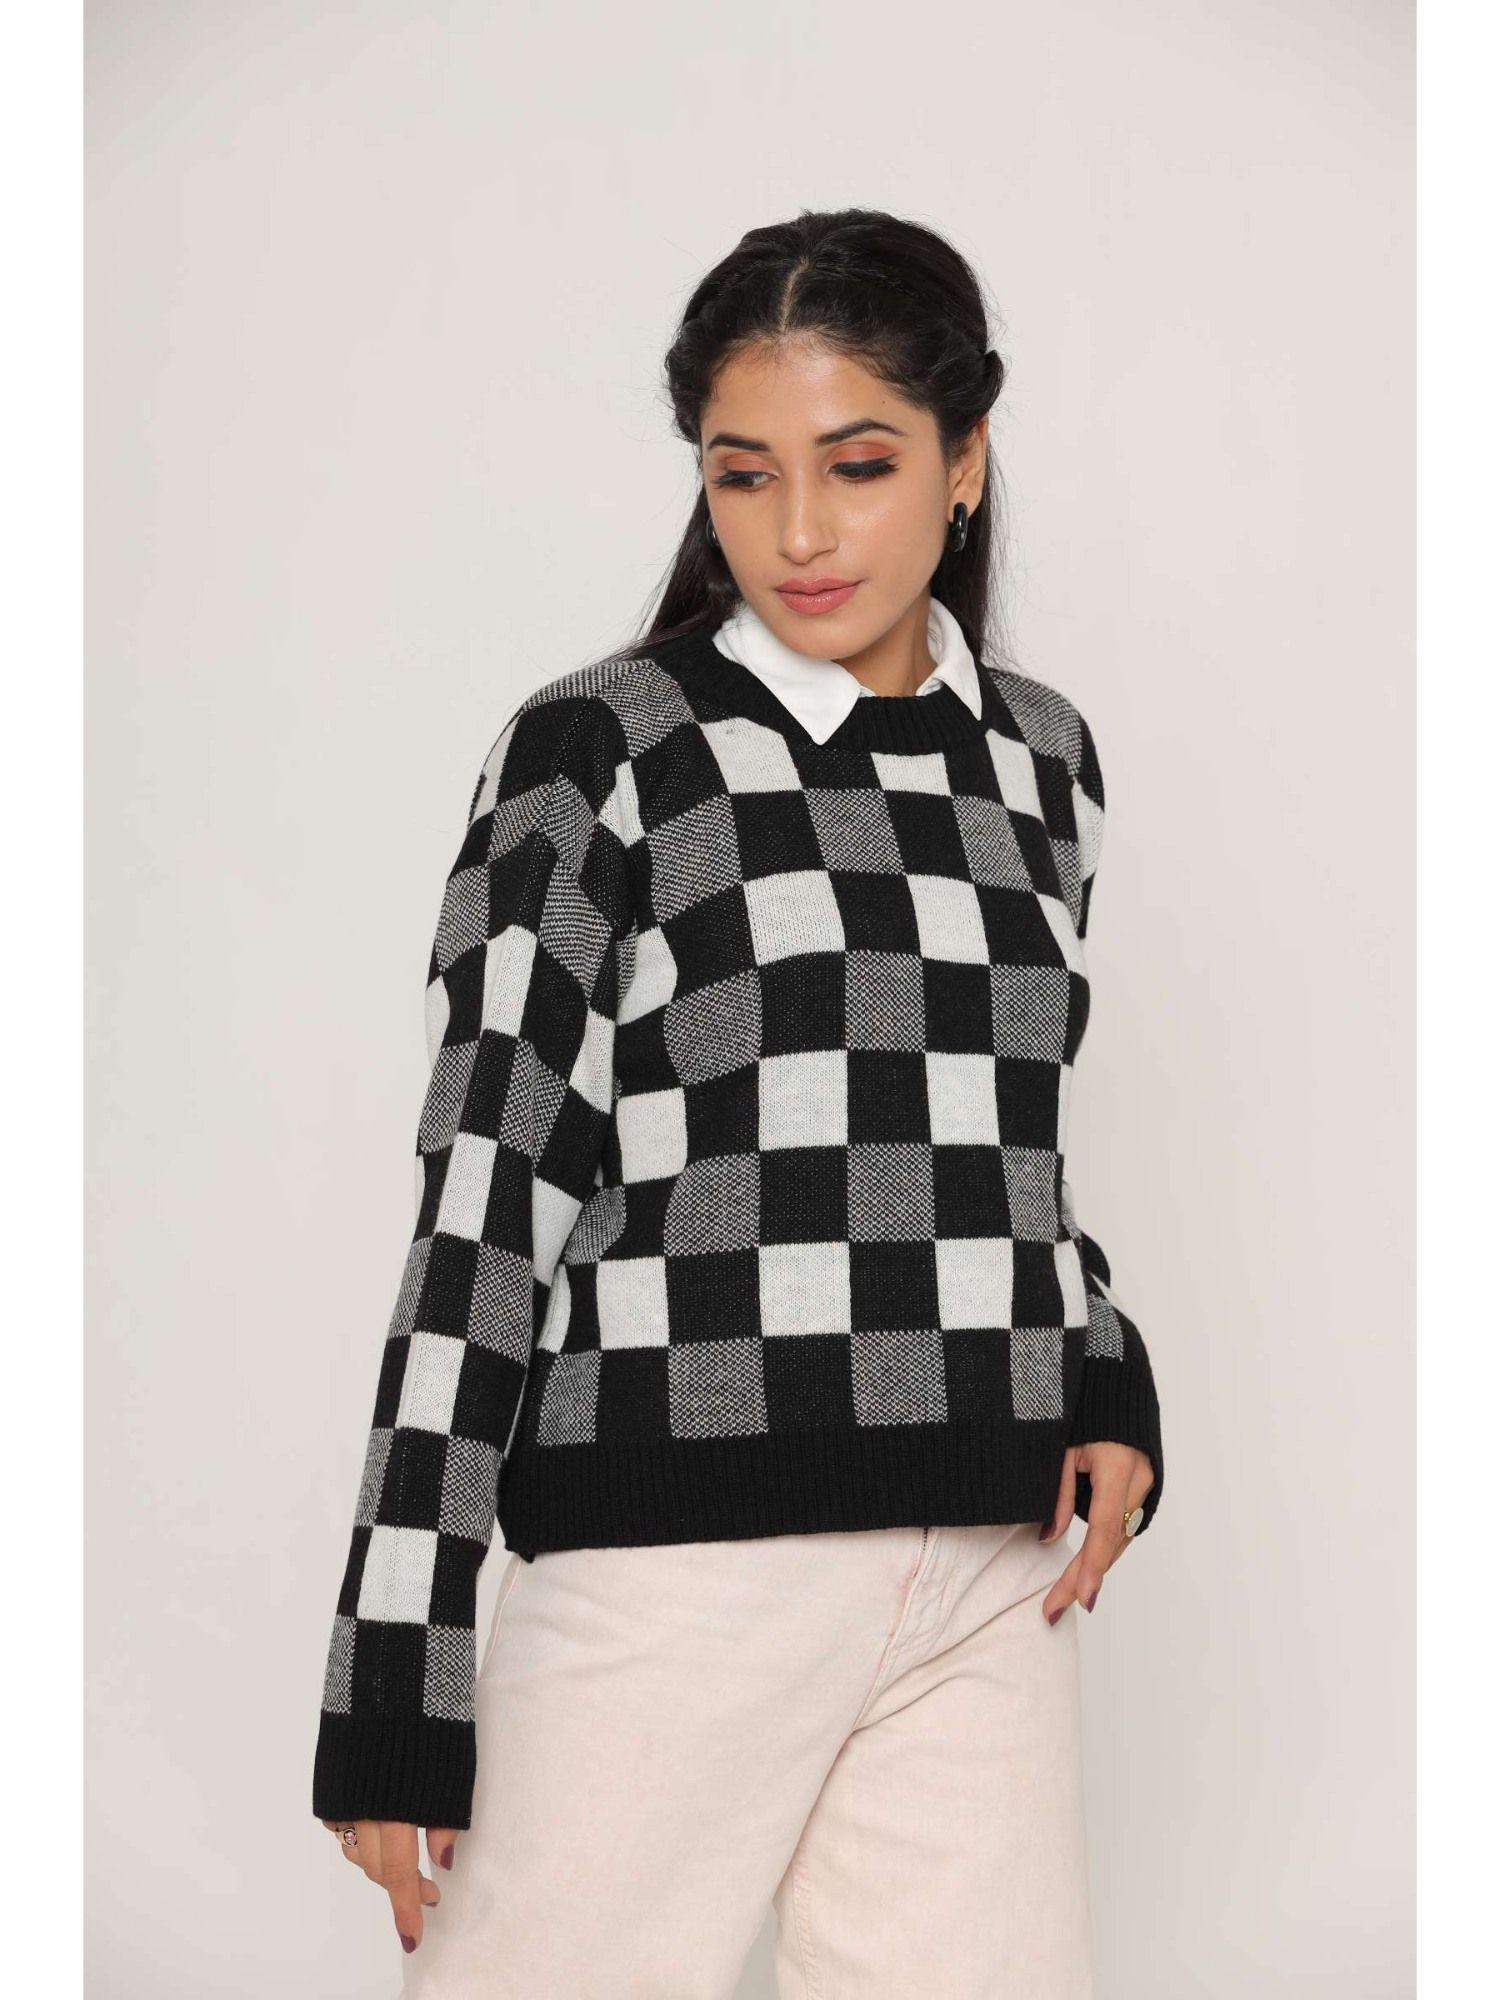 stylish oversized drop shoulders b and w checkered woollen sweaters for women